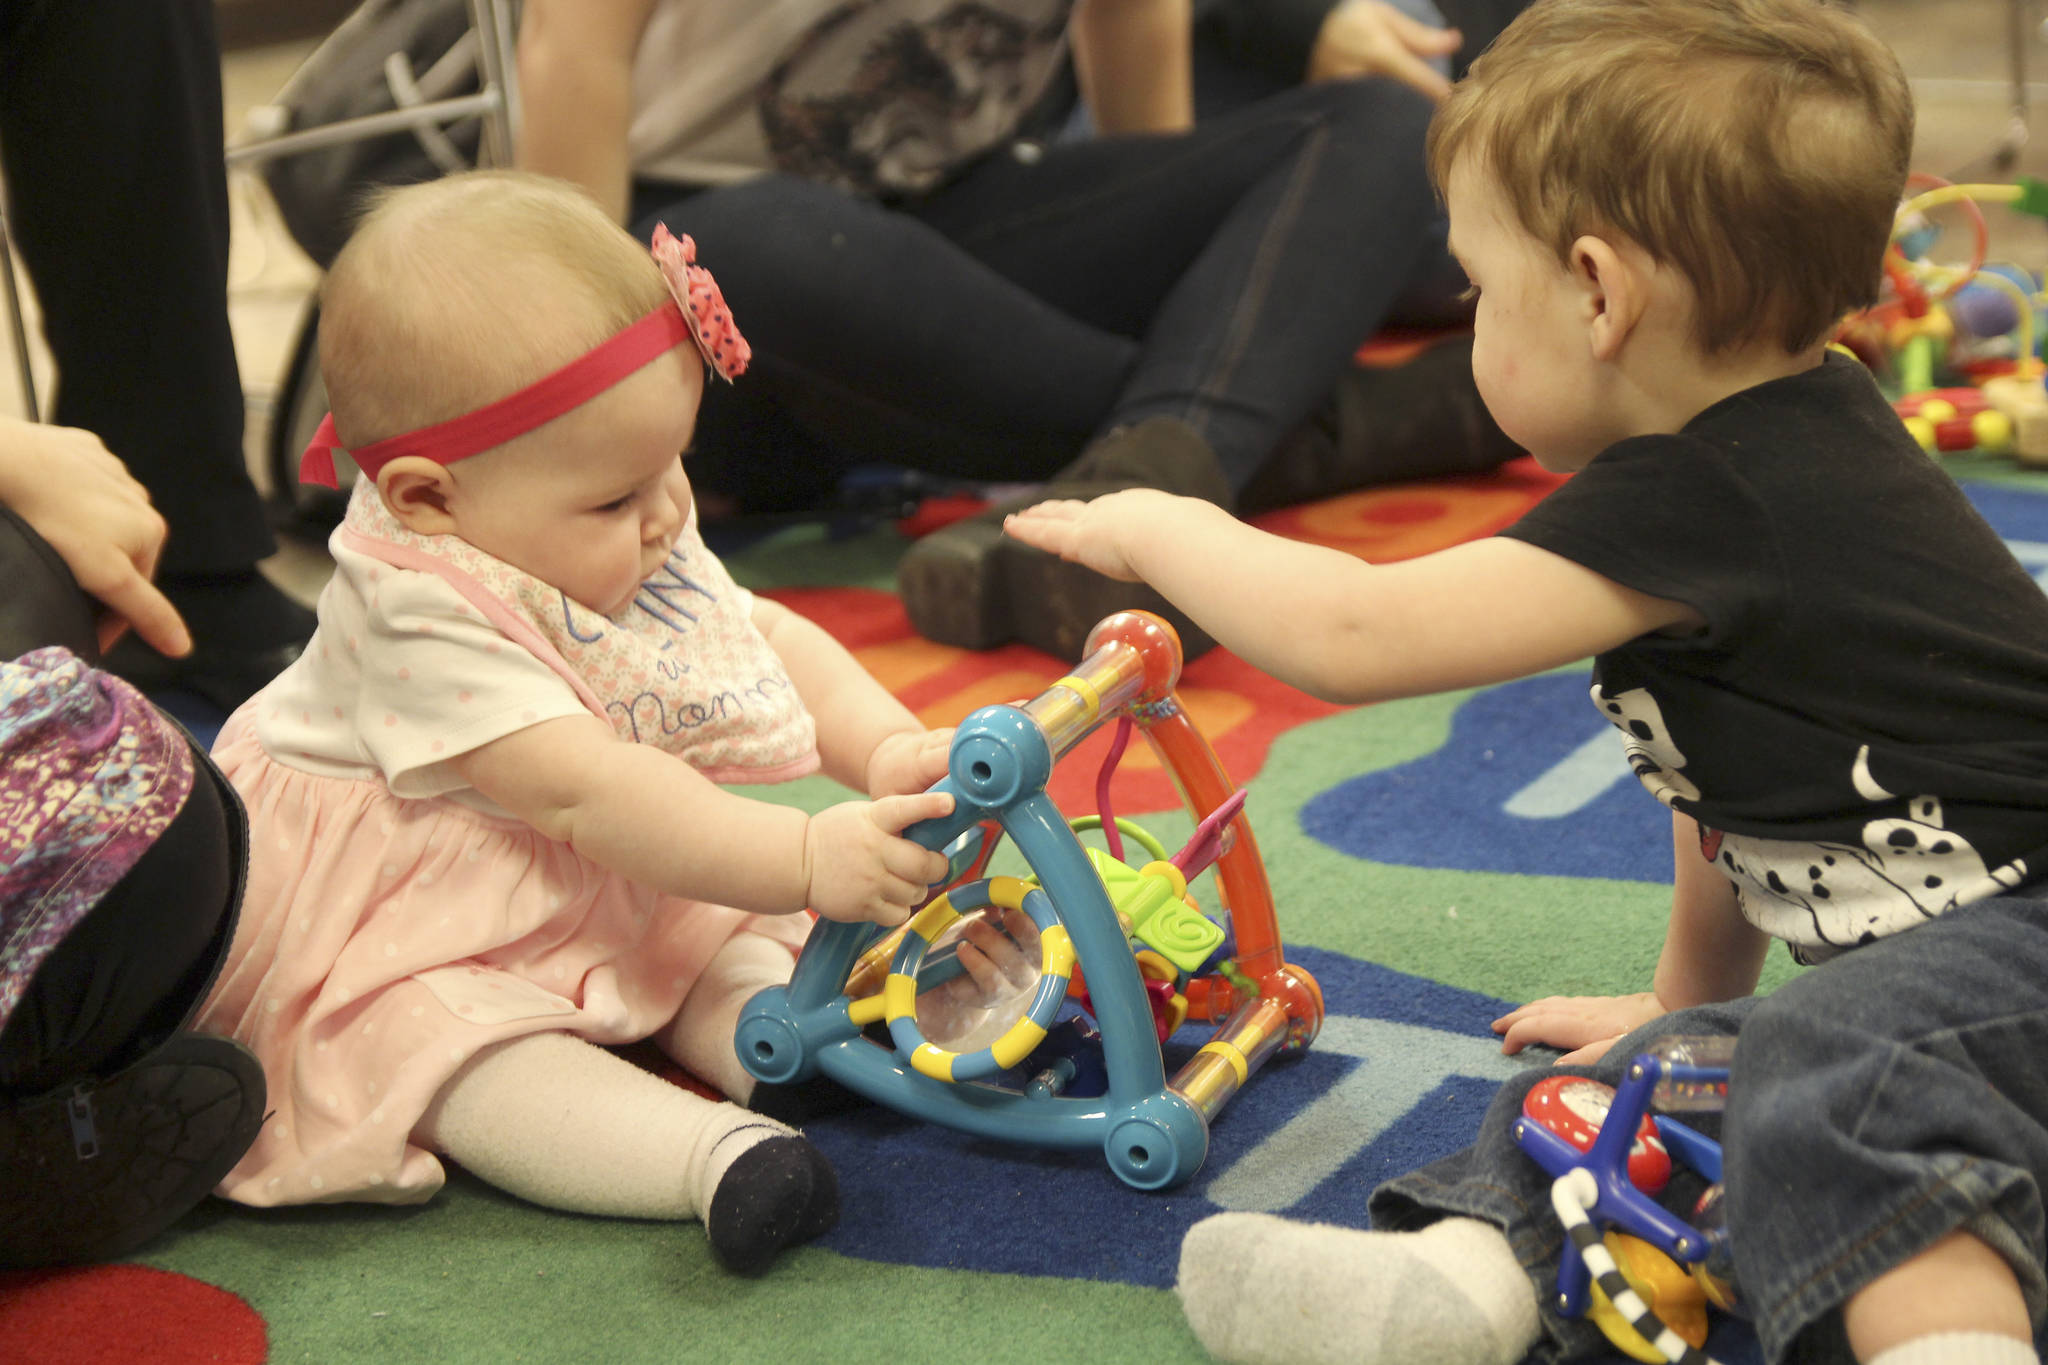 Rebekah Reisen, 6 months old, plays with other children at Baby Storytime. “I like that it’s not just reading, I like that she can interact with other little babies. She just loves it,” said Rebekah’s mother, Elizabeth Reisen, of Oak Harbor.